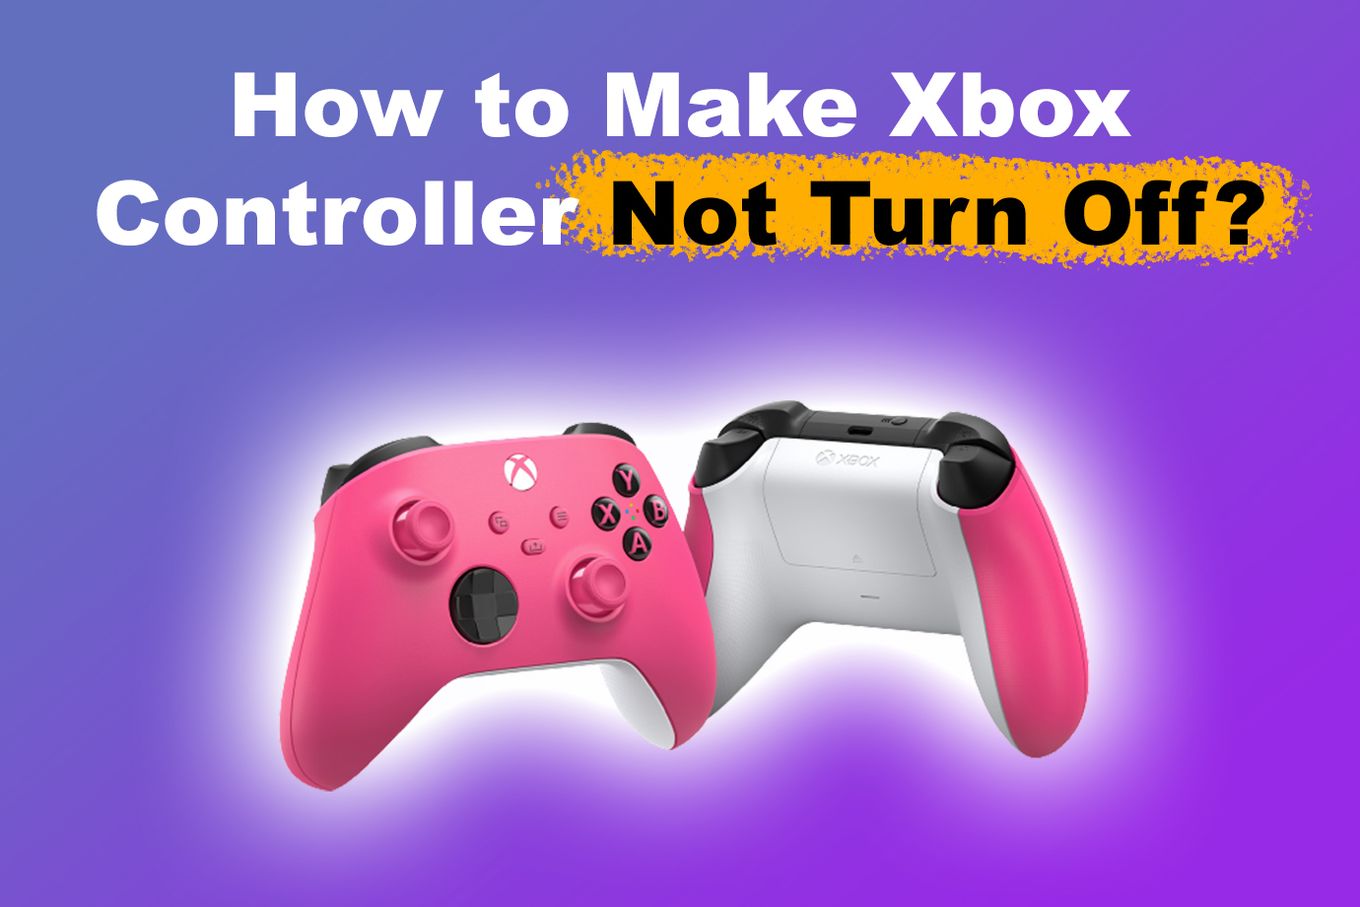 How to Make Xbox Controller Not Turn Off